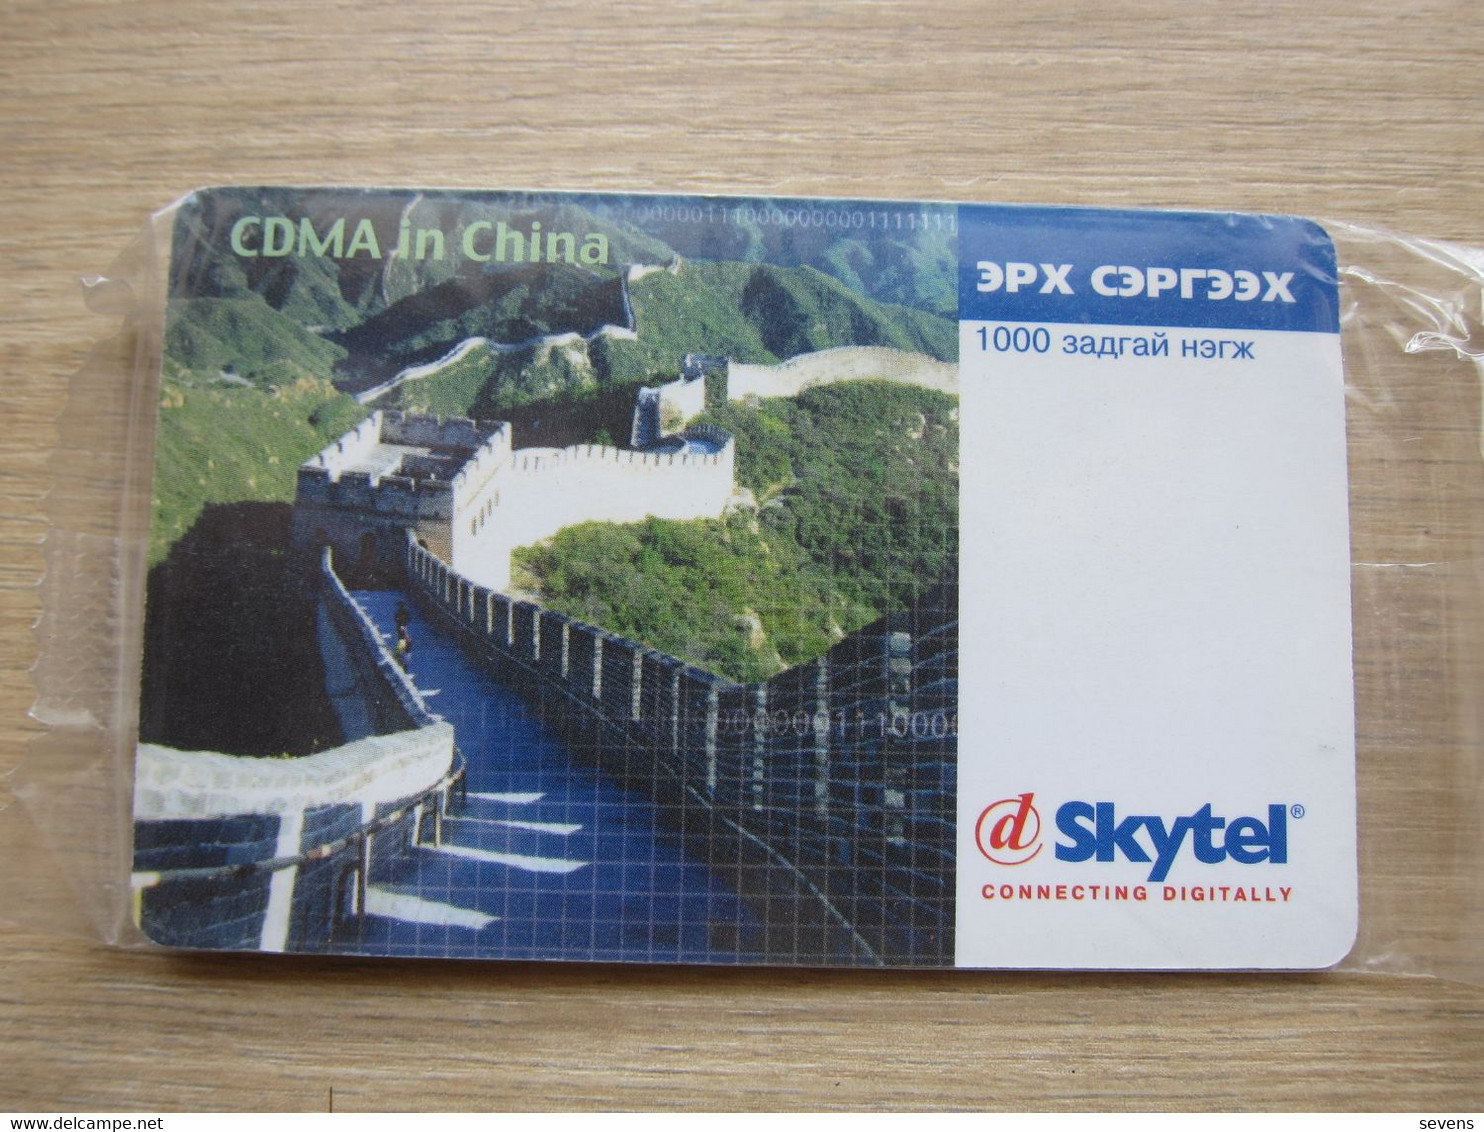 Skytel CDMA Prepaid Phonecard, The Great Wall, Mint In Blister Expired - Mongolia